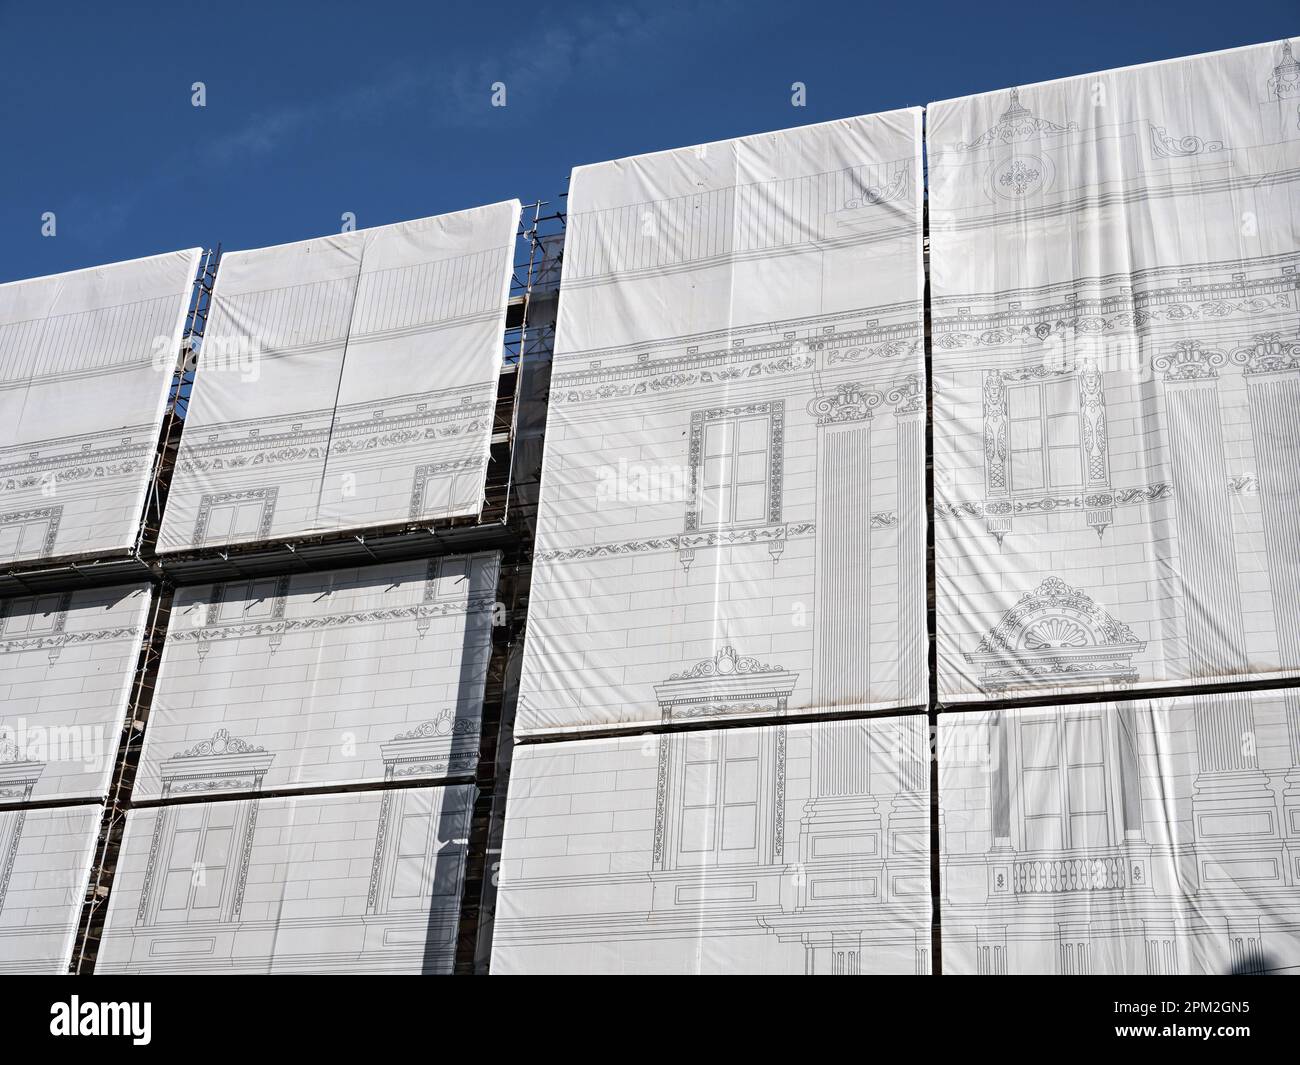 Scaffolding shroud with architecture drawing hiding the reconstruction of old building Stock Photo